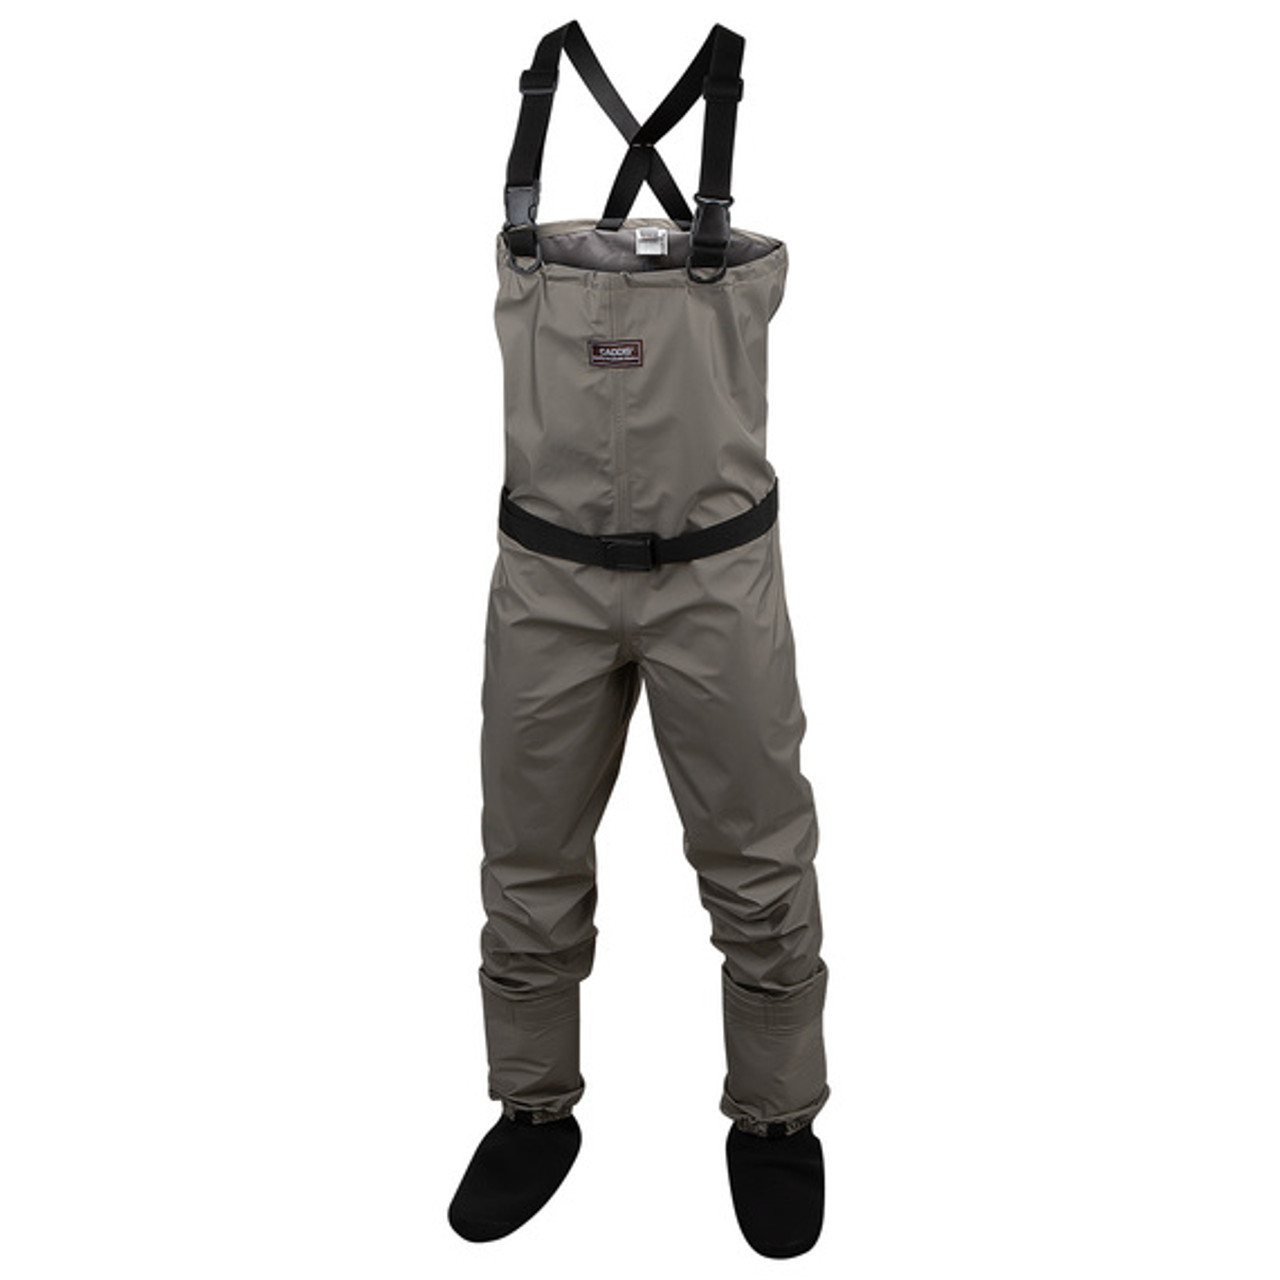 kemimoto Breathable Stockingfoot Waders for Men, Lightweight